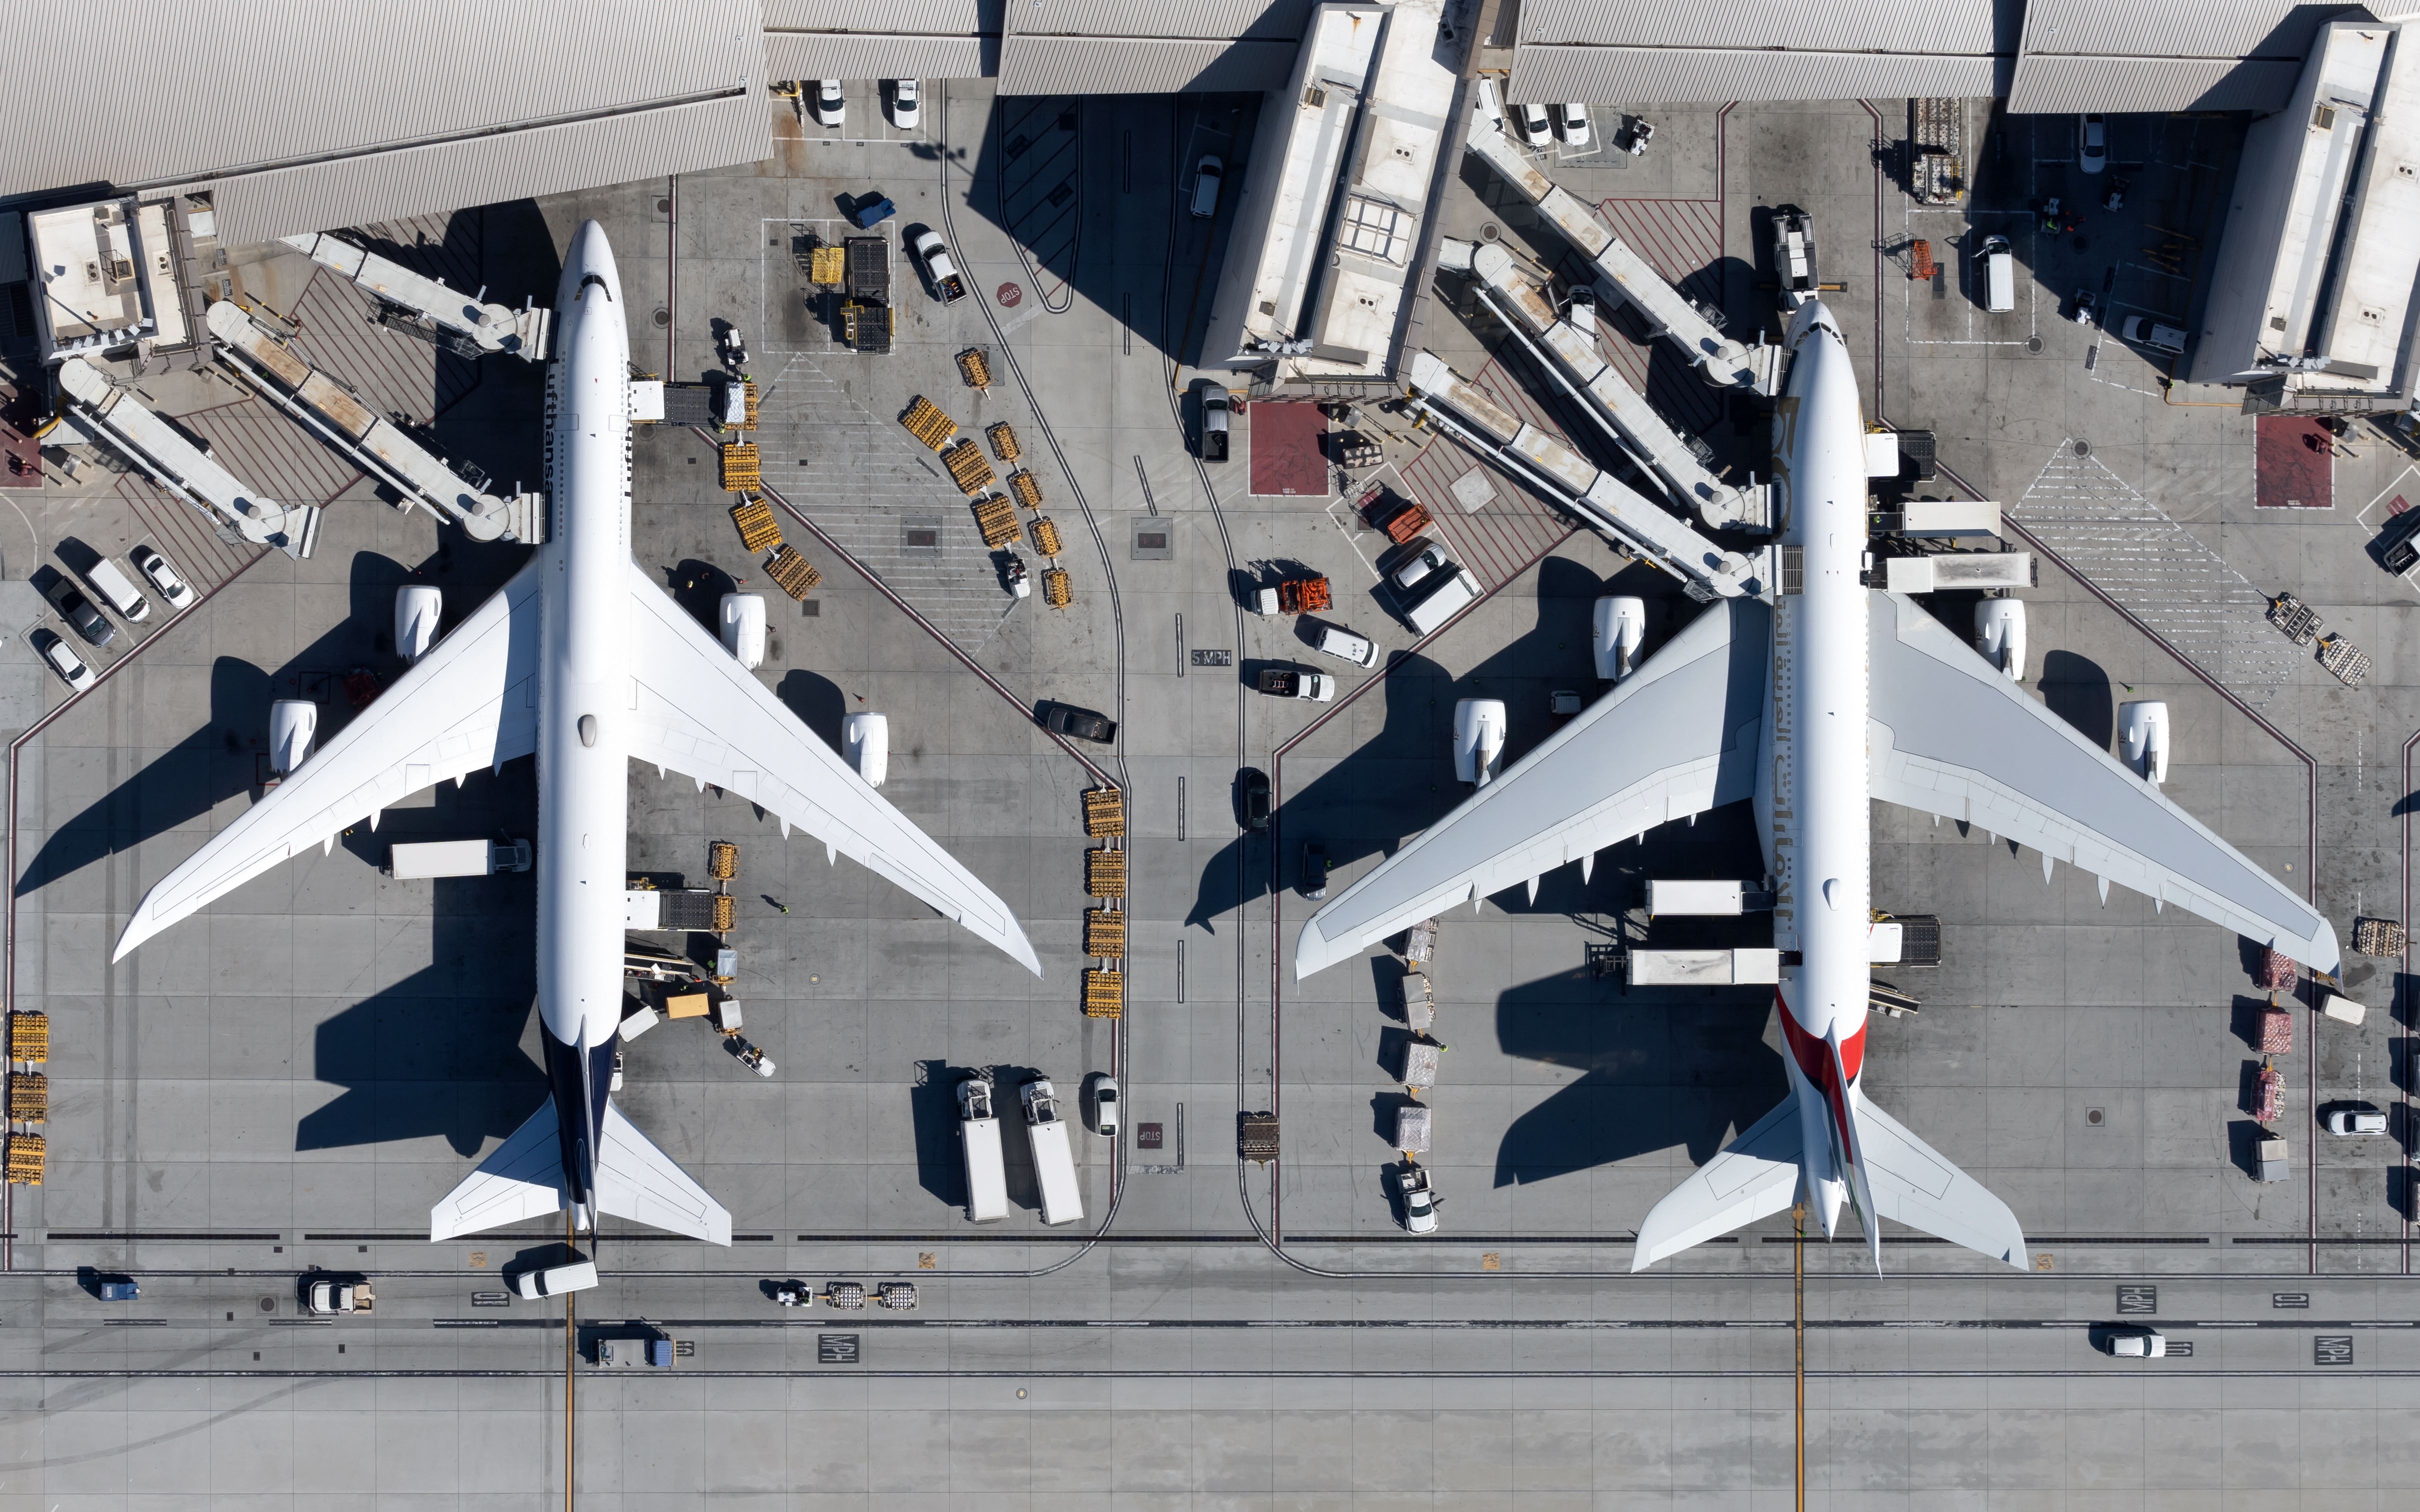 Aerial view of multiple parked aircraft at LAX's Tom Bradley International Terminal.